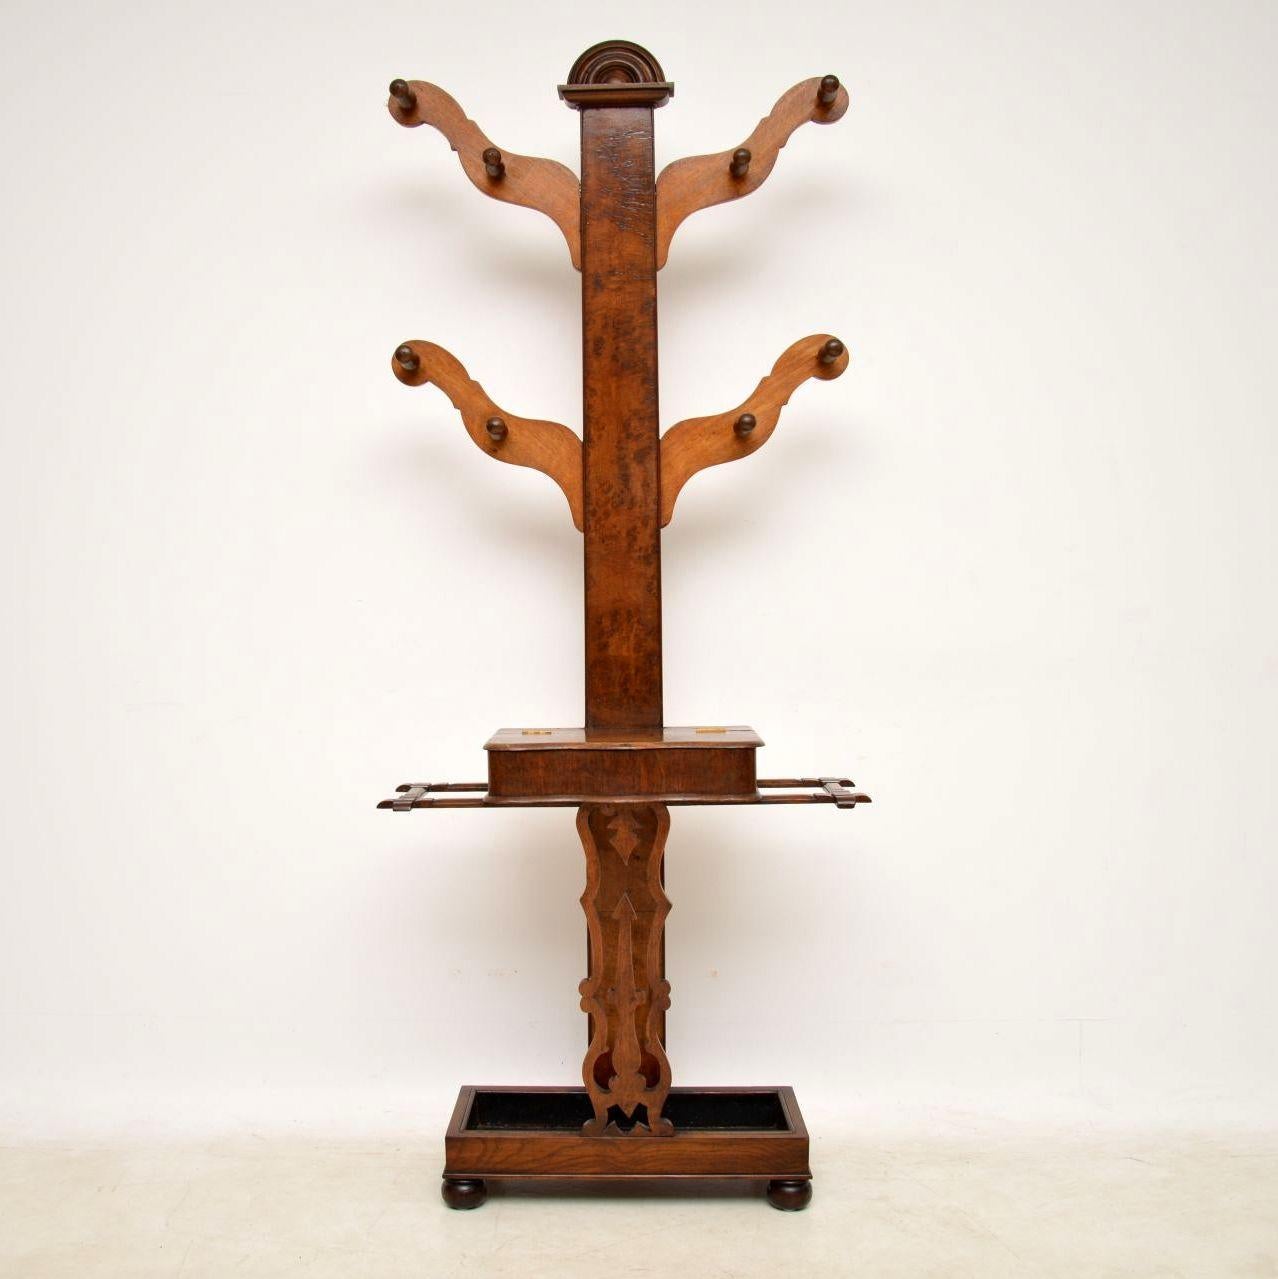 Very unusual antique Victorian tree hall stand with a great design and use of woods. It’s mainly oak, however the long middle section is Pollard oak, which has a similar look to burr walnut and was favoured a lot in the Victorian period. It has an